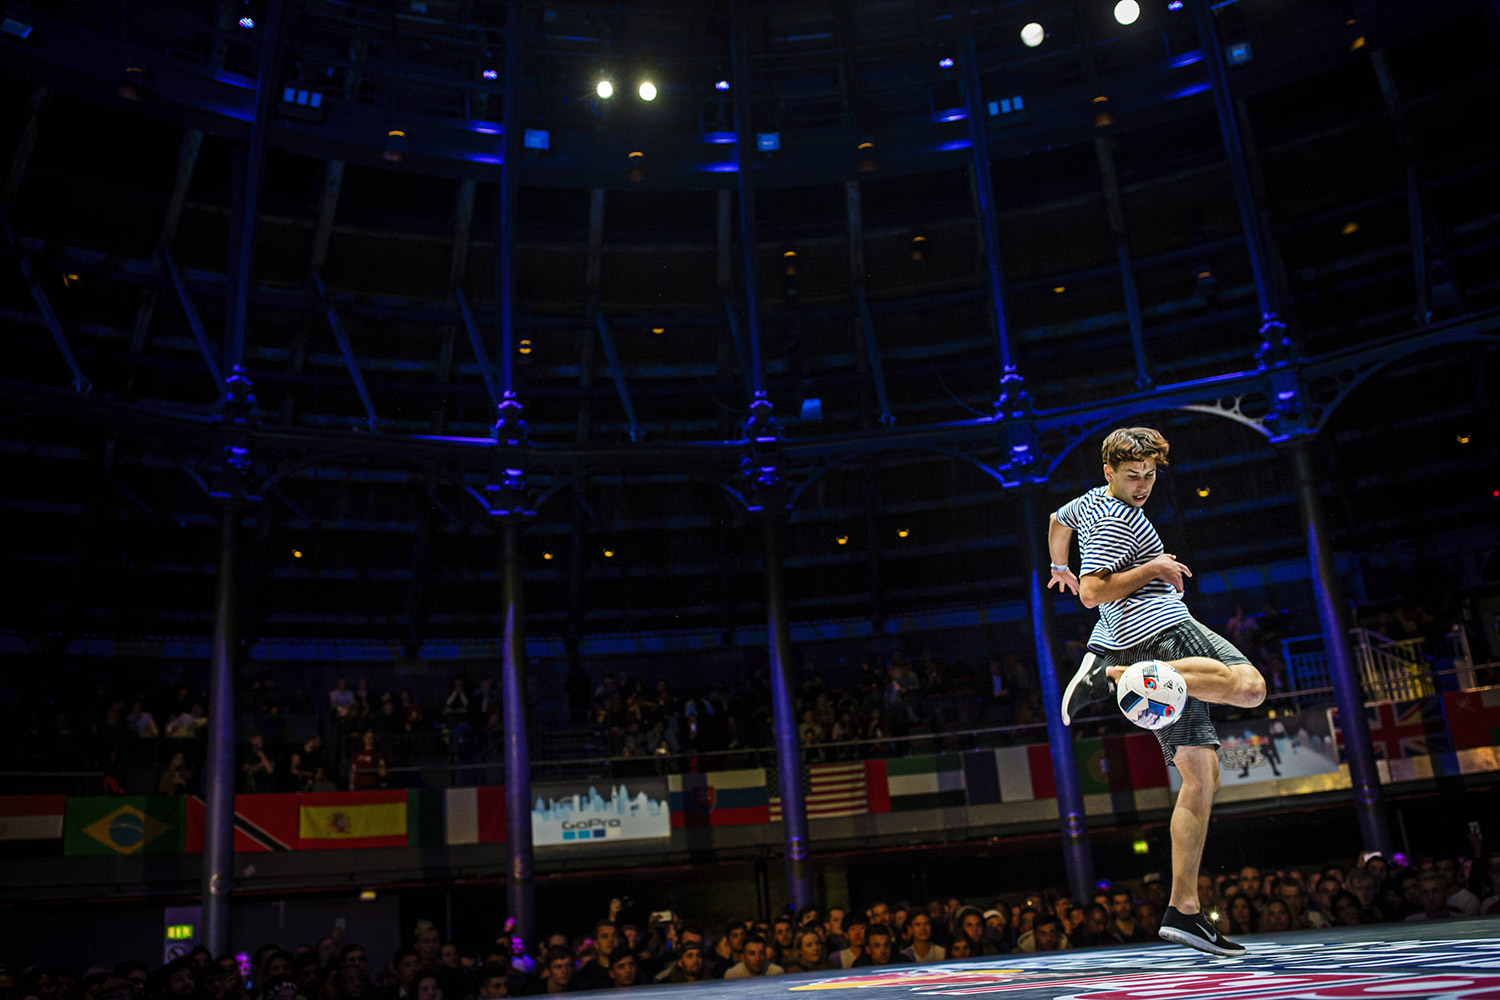 Daniel Dennehy of Ireland competes during the finals of the freestyle football world championship Red Bull Street Style in London, United Kingdom on November 8, 2016 // Samo Vidic/Red Bull Content Pool // AP-1Q44MTHK51W11 // Usage for editorial use only // Please go to www.redbullcontentpool.com for further information. //